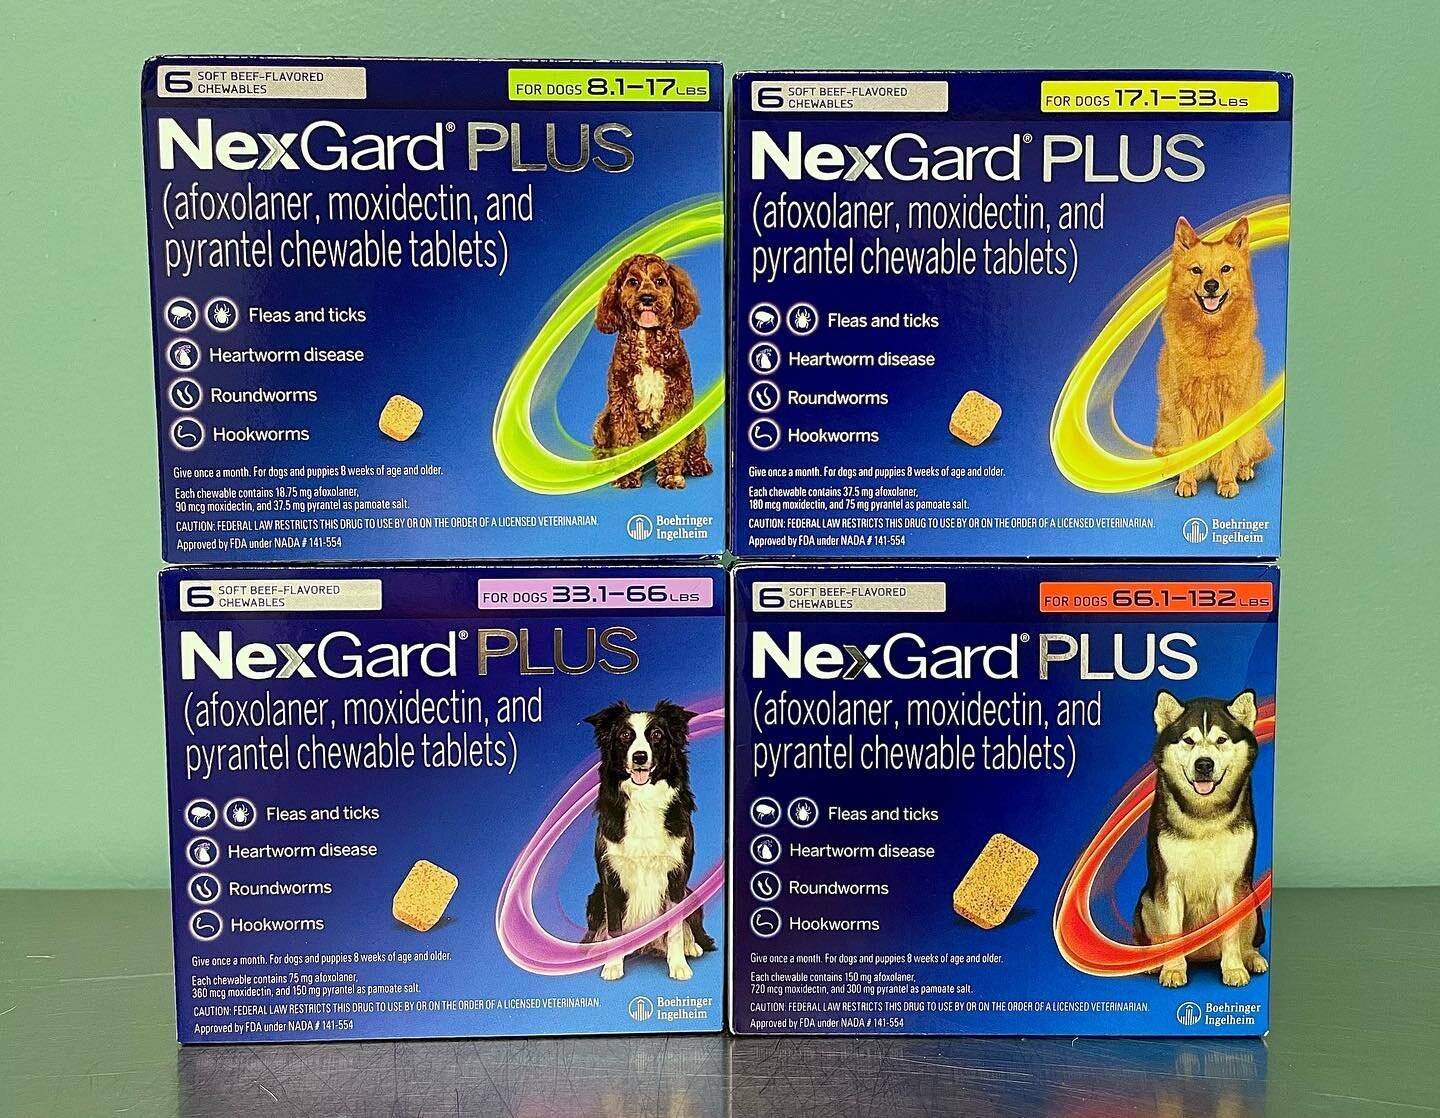 ‼️NEW PRODUCT ALERT‼️

🤑Buy 6 months of NexGard PLUS &amp; receive a $35 instant rebate 

🥩Delicious, beef flavored soft chew 

🐾Safe for dogs 8 weeks of age &amp; older weighing 4lbs or more

🦟Prevents heartworm disease 

🚫Protects against the 